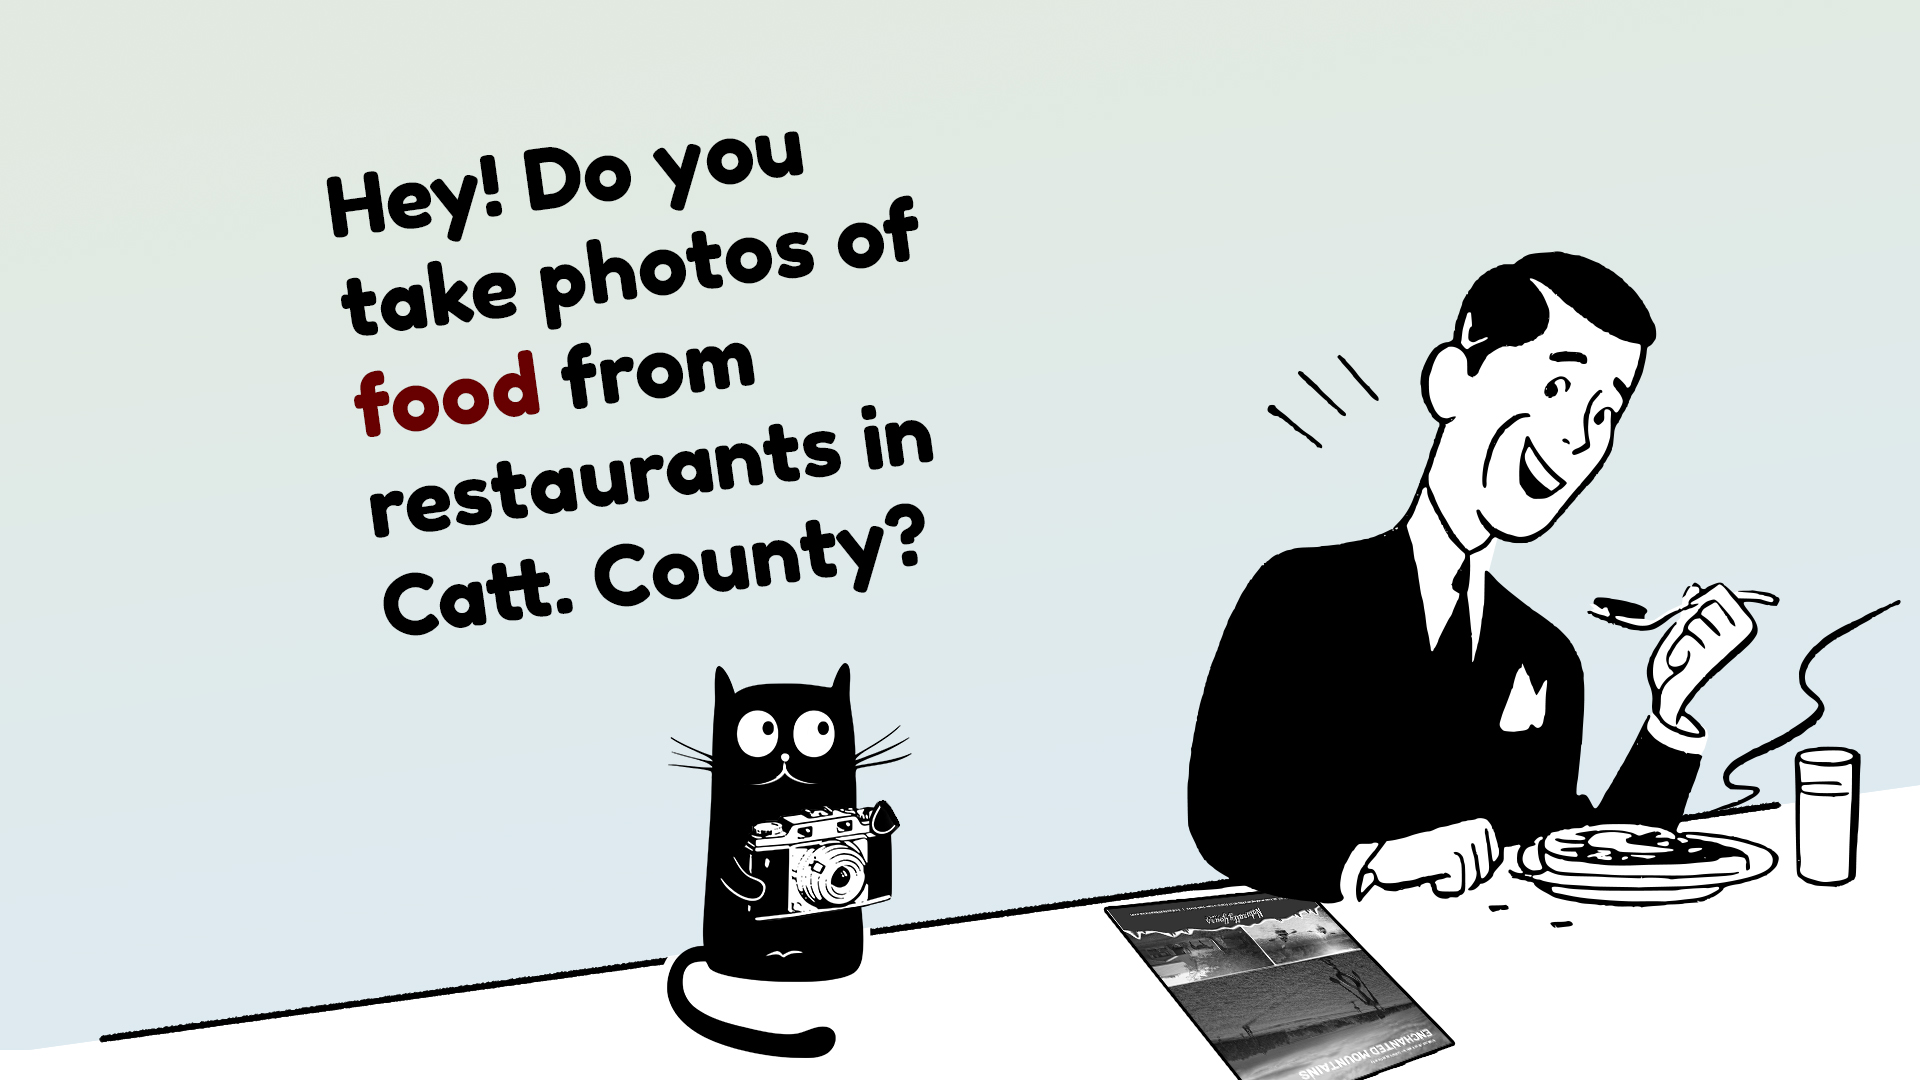 Gentleman eating a meal while a cat sits nearby with a camera. Text overlayed "Hey! Do you take photos of food from restaurants in Catt. County?"